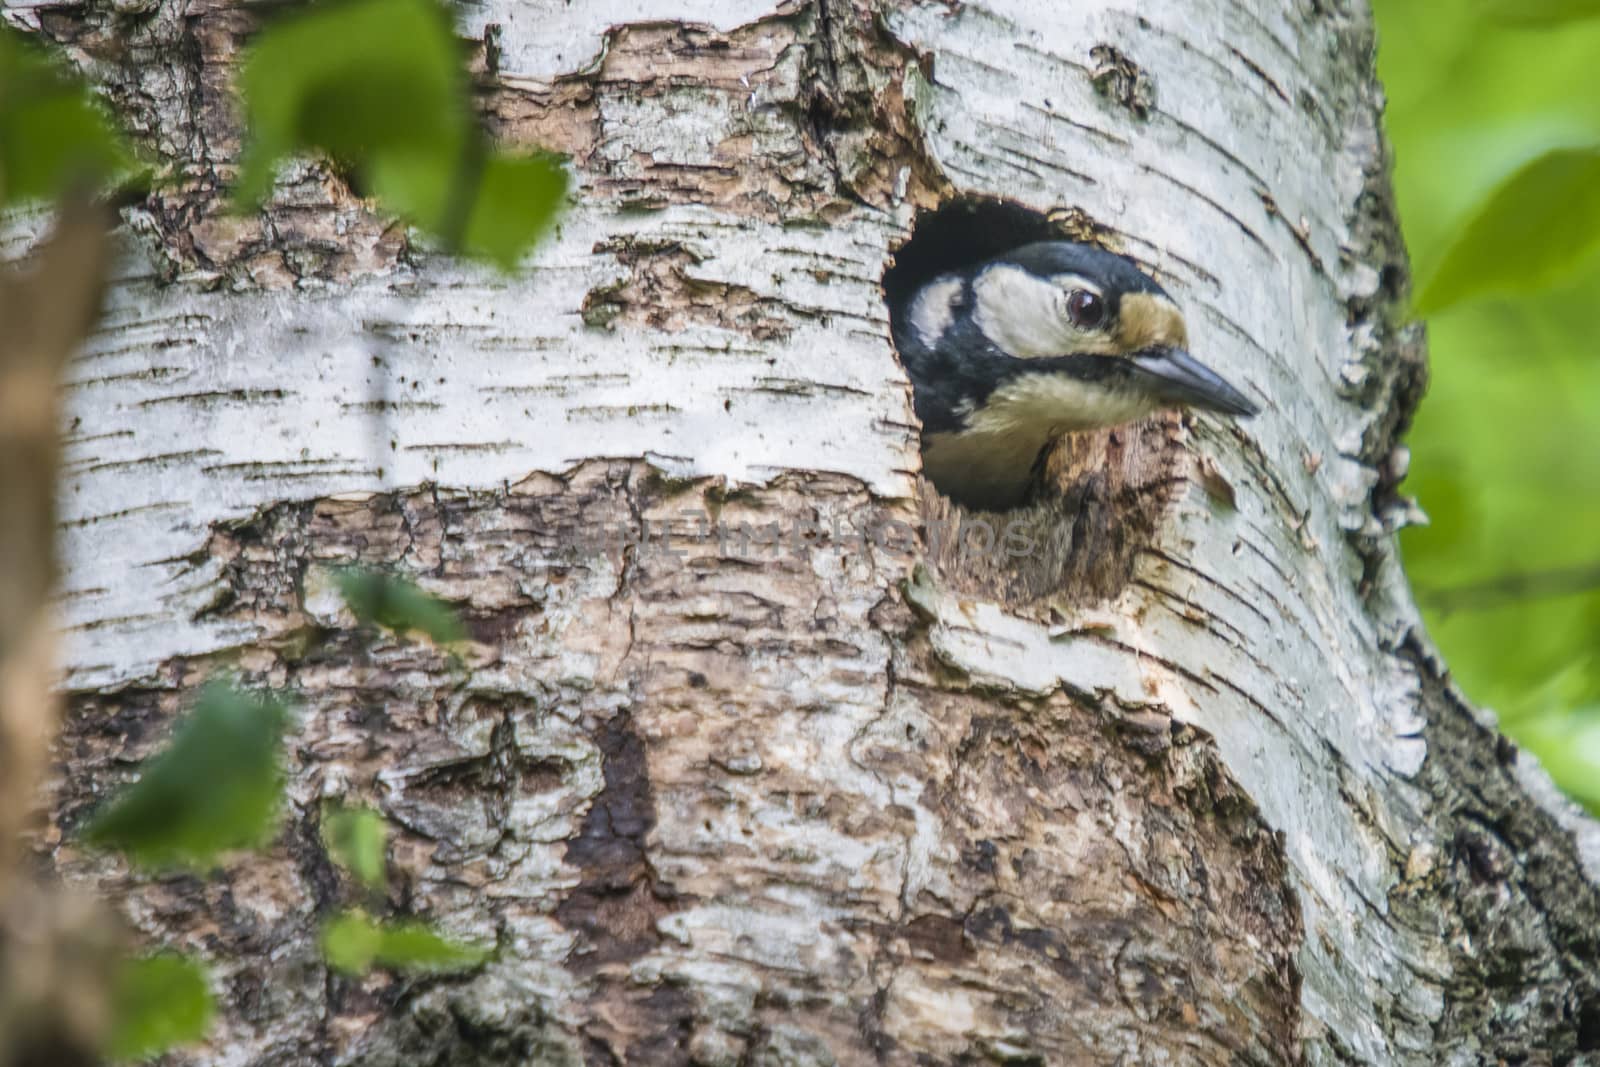 Great Spotted Woodpecker, Dendrocopos major looks out of the hole in the nest to see if it is ready to fly out. The image is shot at Roeds mountain in Halden, Norway.